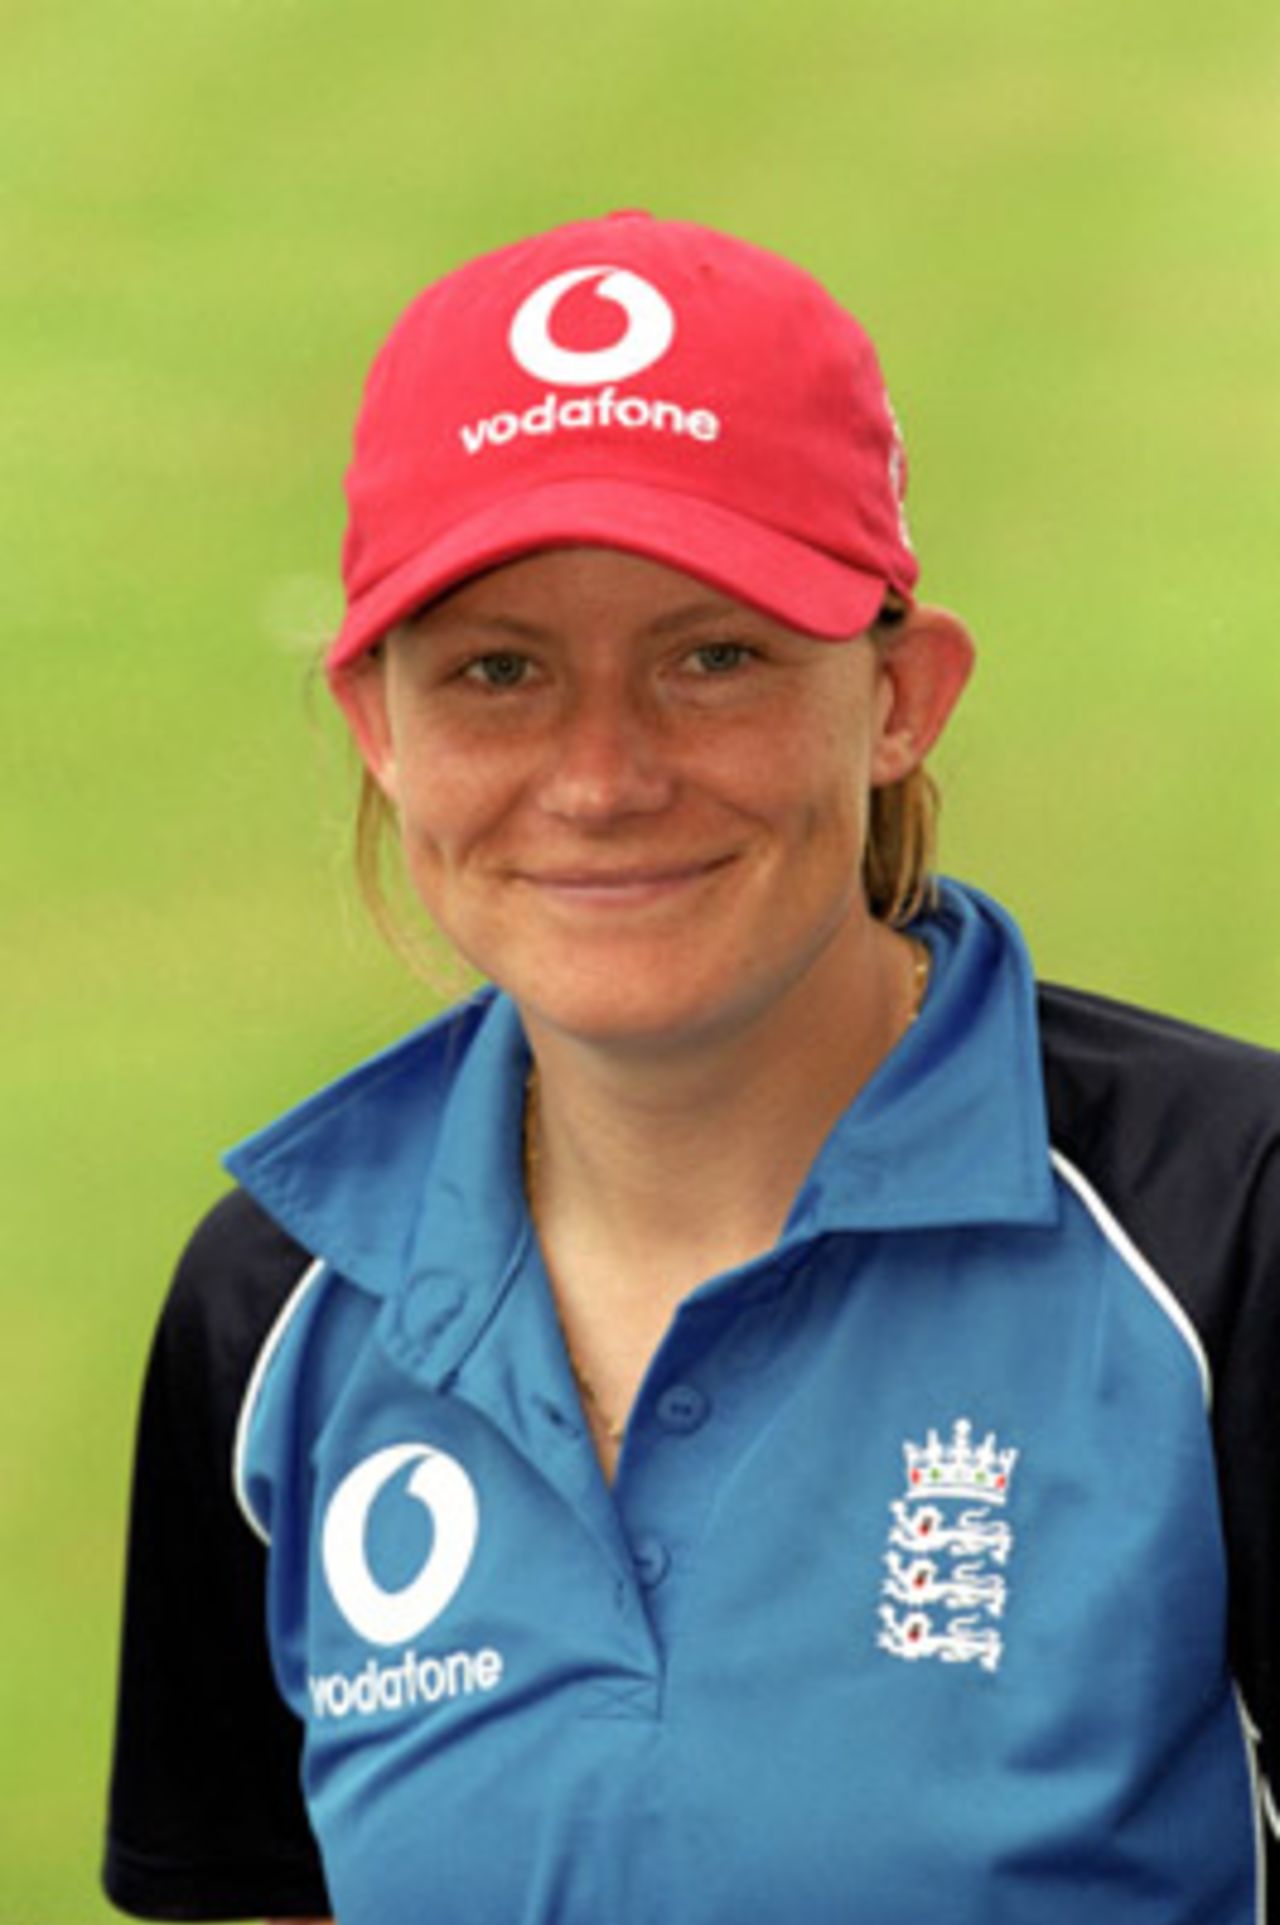 Portrait of Kathryn Leng - England player in the CricInfo Women's World Cup 2000